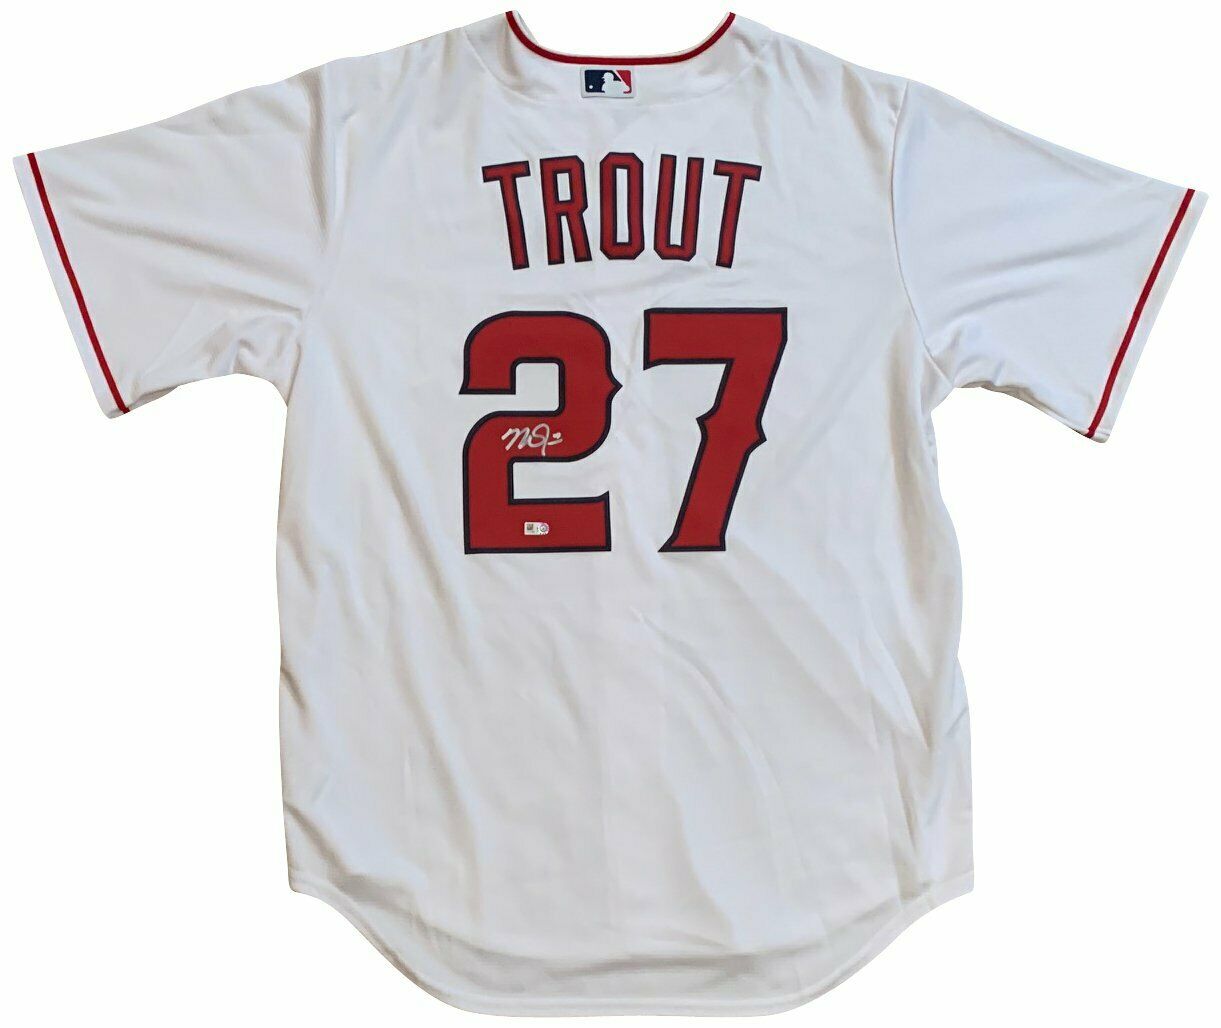 NMOT**MIKE TROUT** CALIFORNIA ANGELES **** WHITE HOME JERSEY 48XL